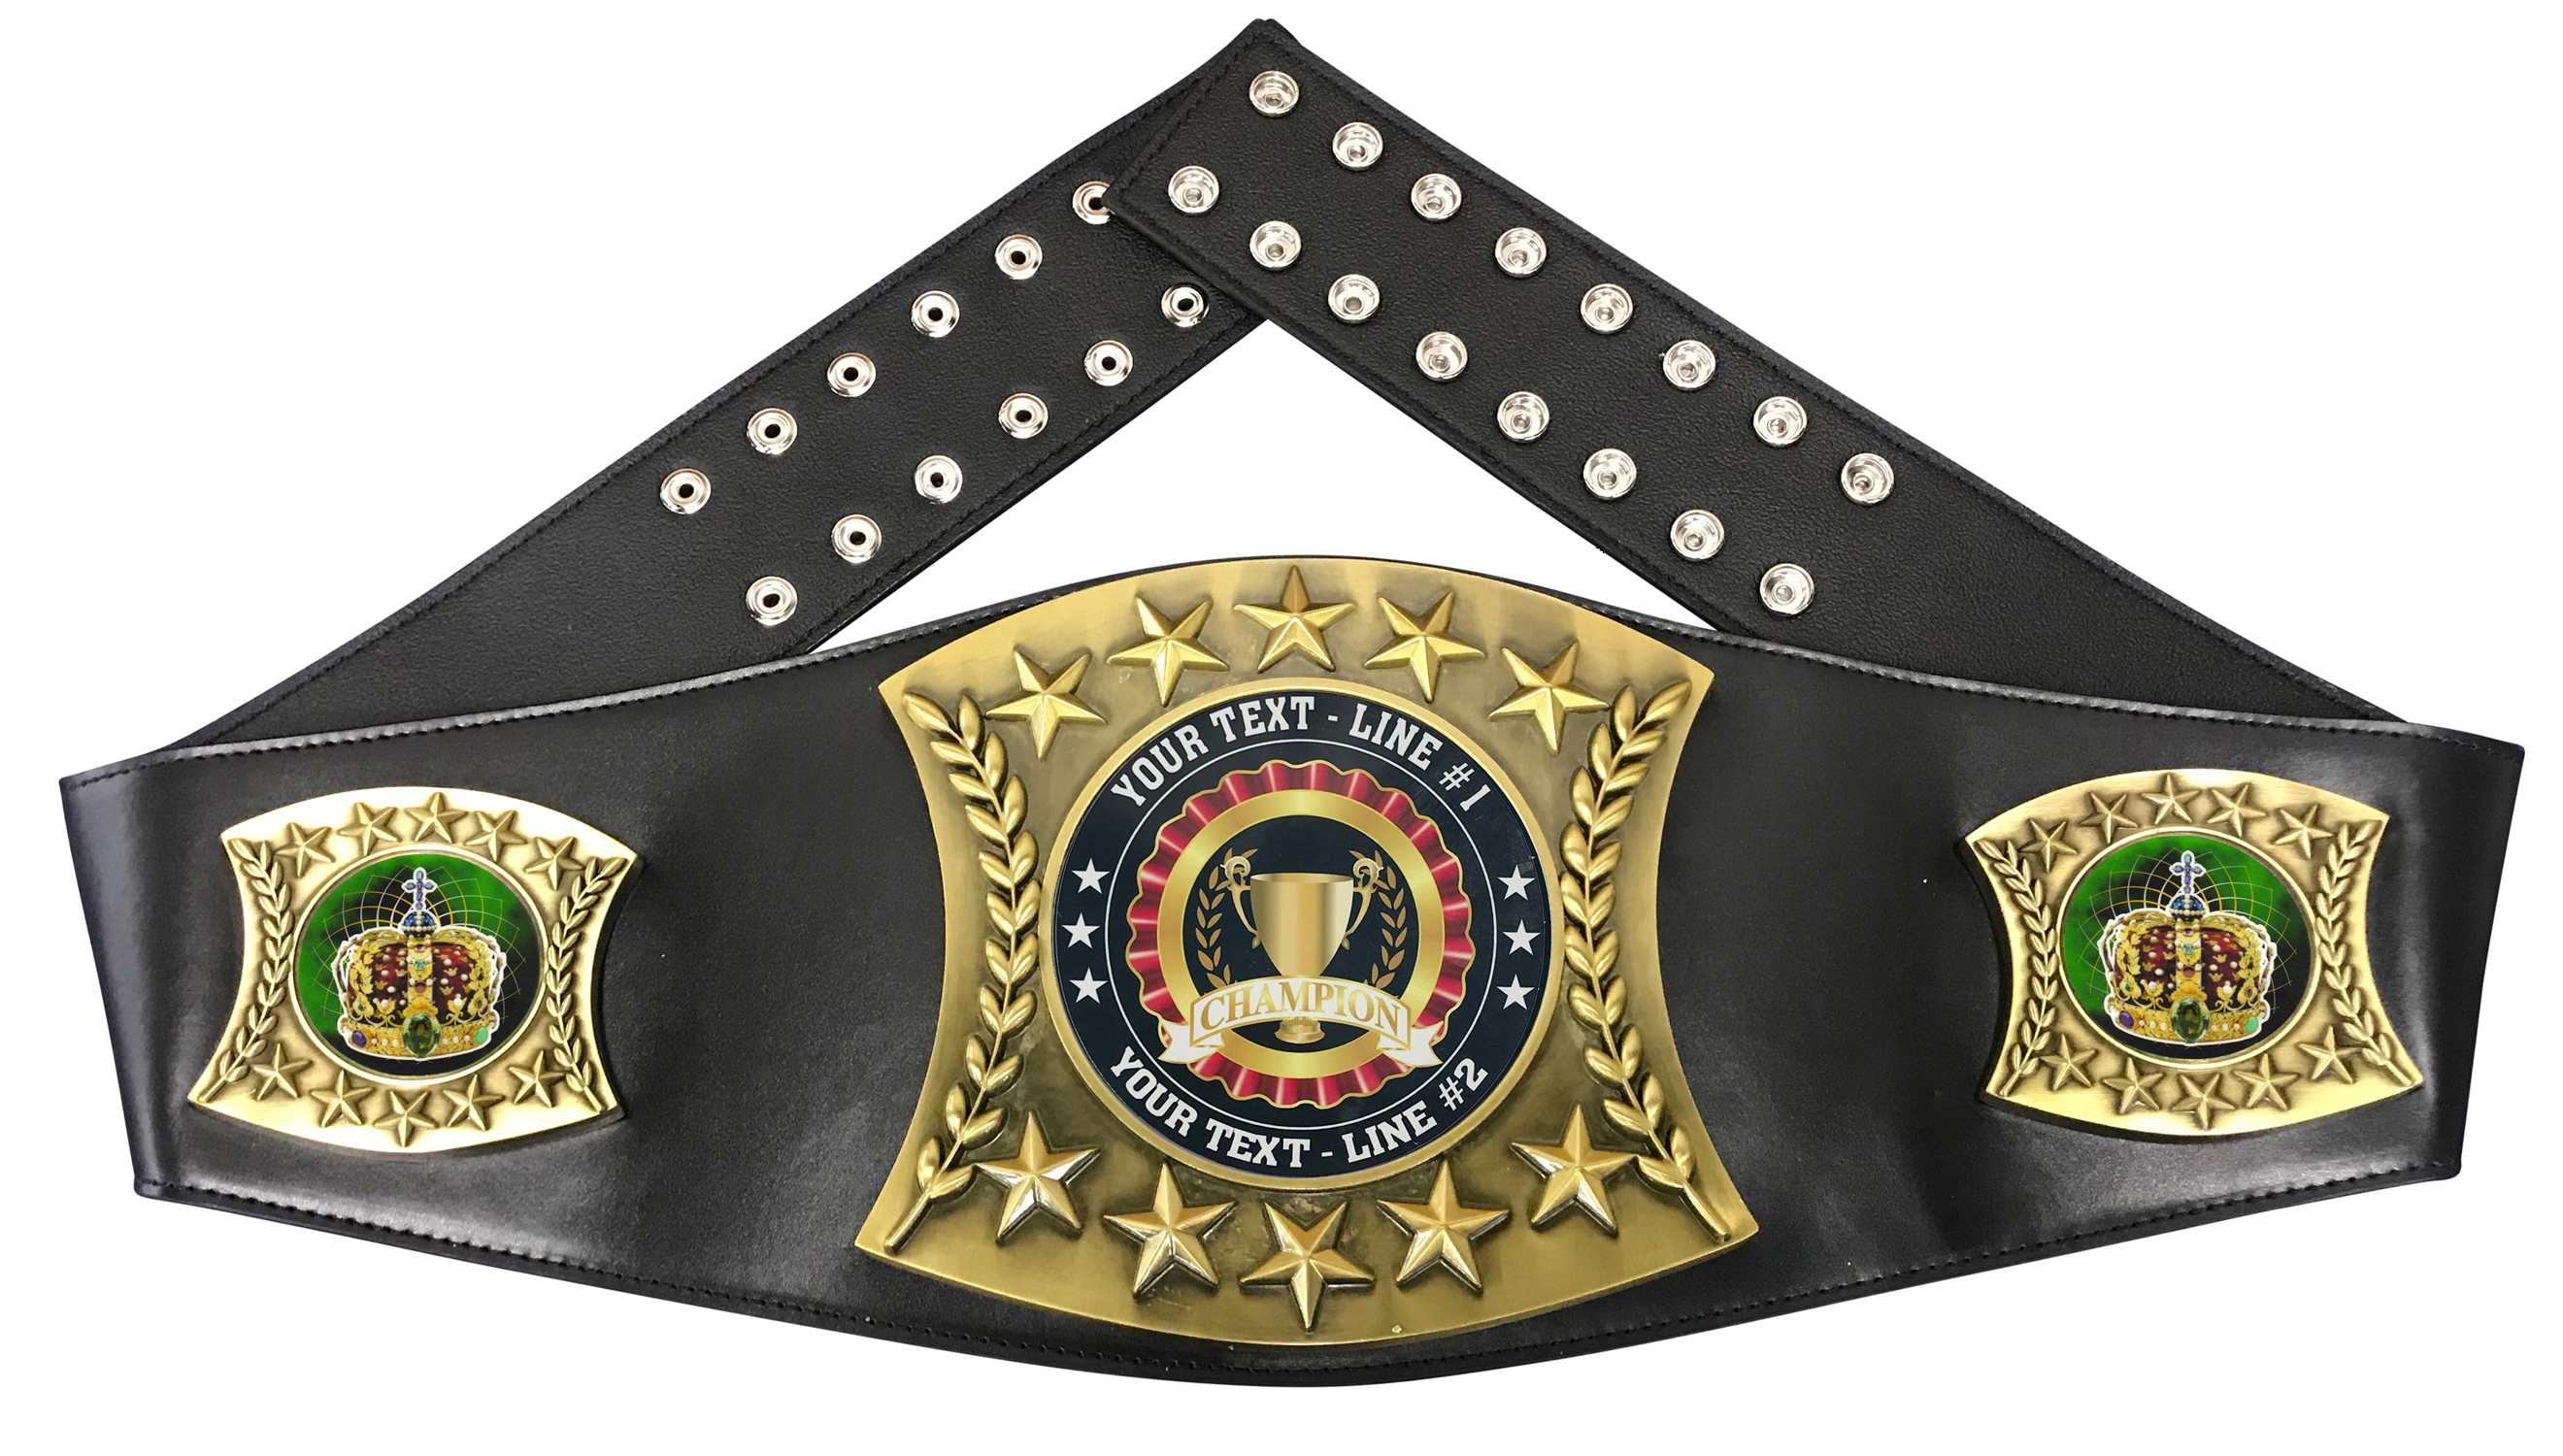 Home Coming King Personalized Championship Belt